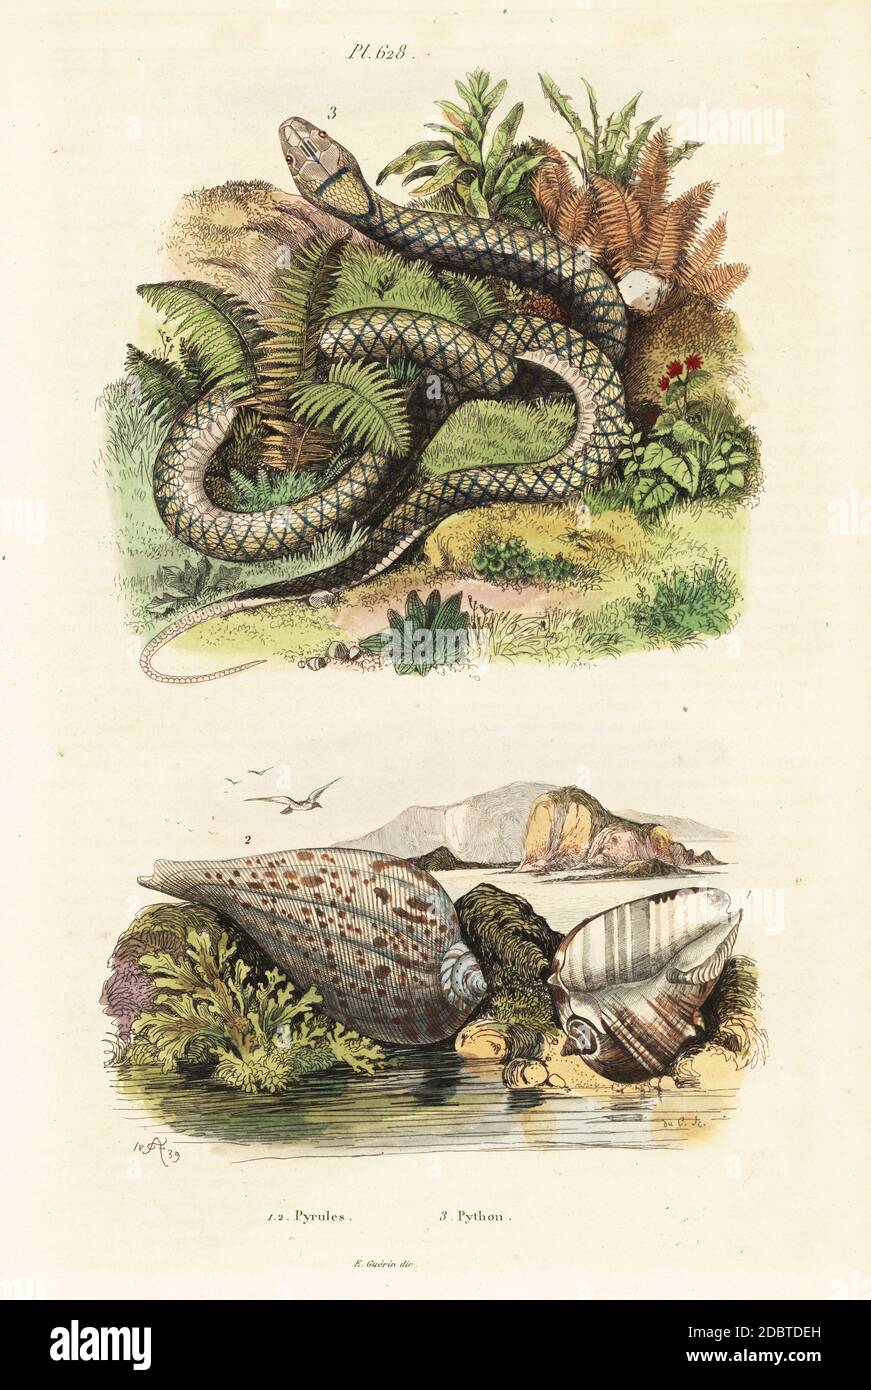 Paper fig shell, Ficus ficus (Pyrula ficus), and amethystine python, Simalia amethistina (Python amethystinus). Handcoloured steel engraving by du Casse after an illustration by Adolph Fries from Felix-Edouard Guerin-Meneville's Dictionnaire Pittoresque d'Histoire Naturelle (Picturesque Dictionary of Natural History), Paris, 1834-39. Stock Photo